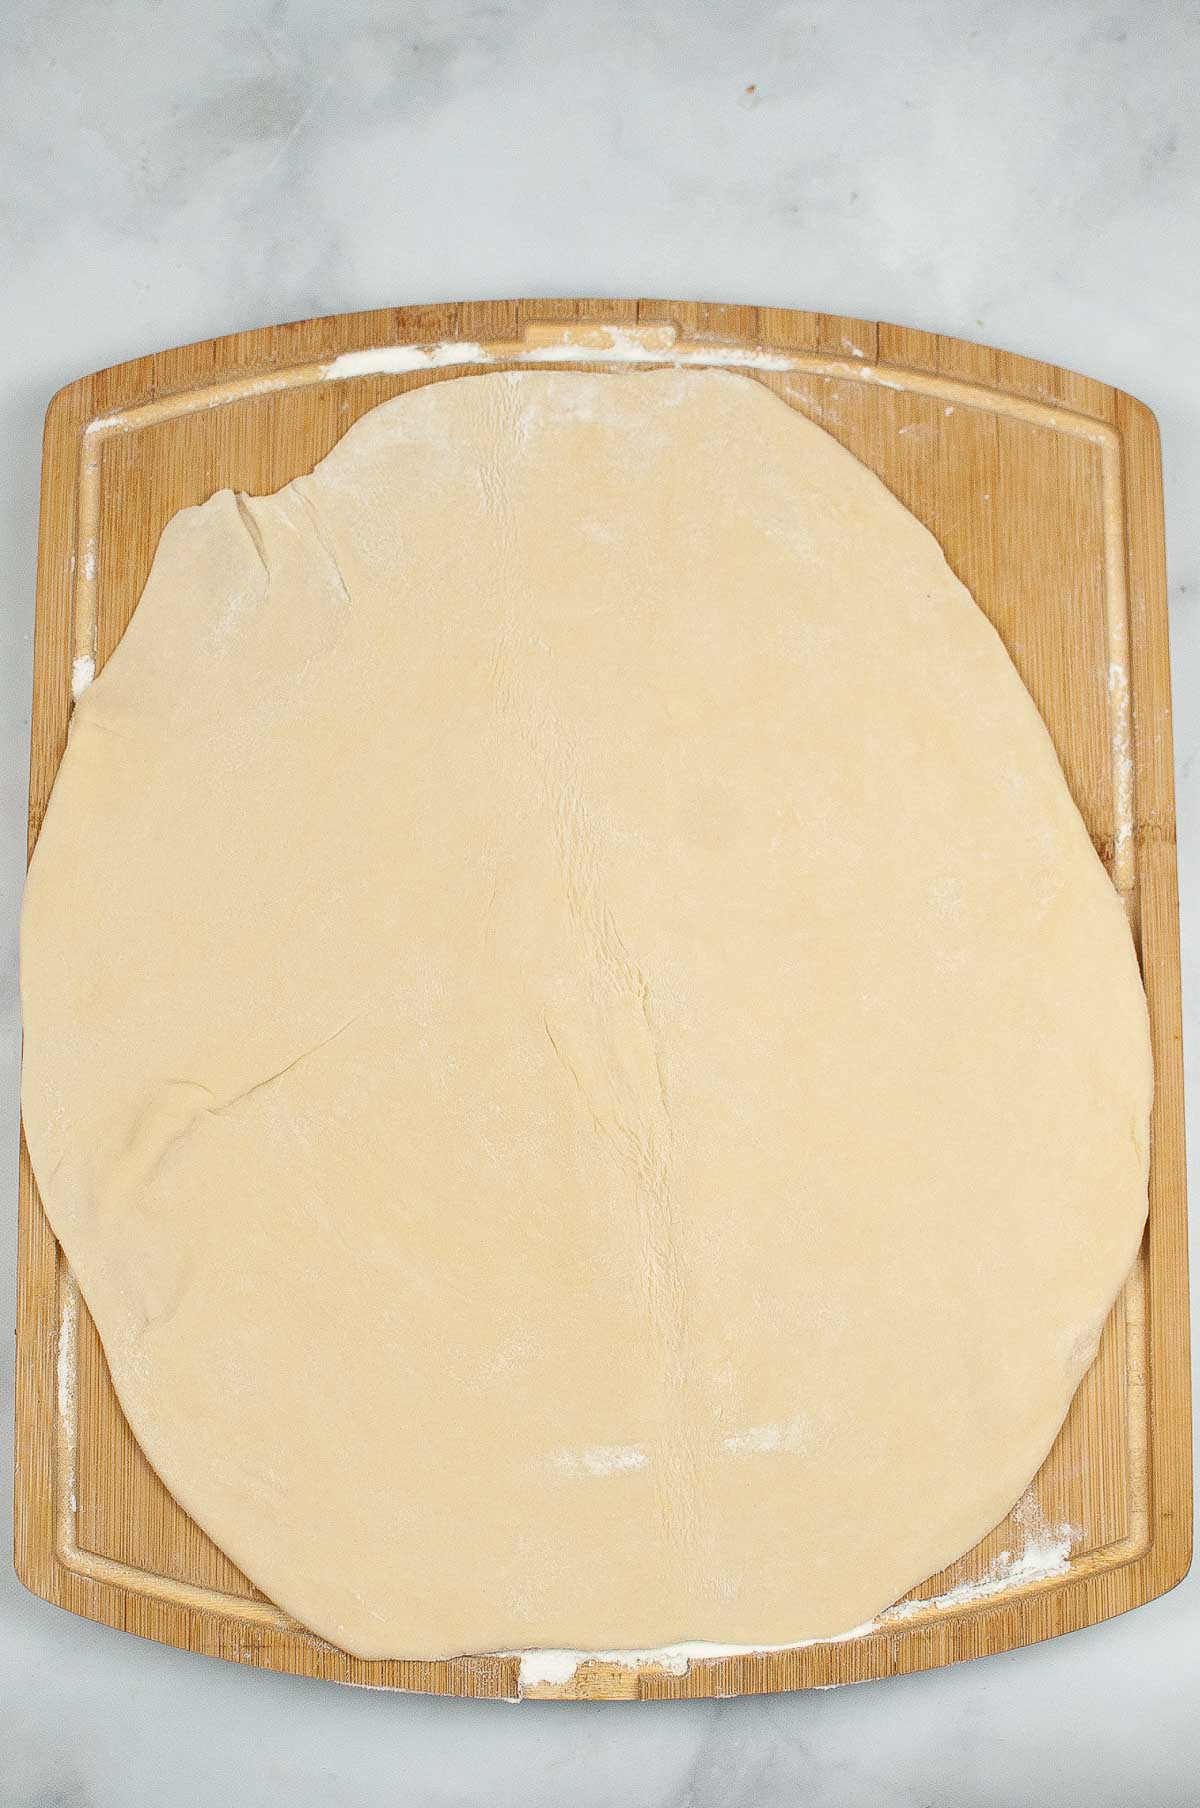 Rolled out pie crust on a cutting board